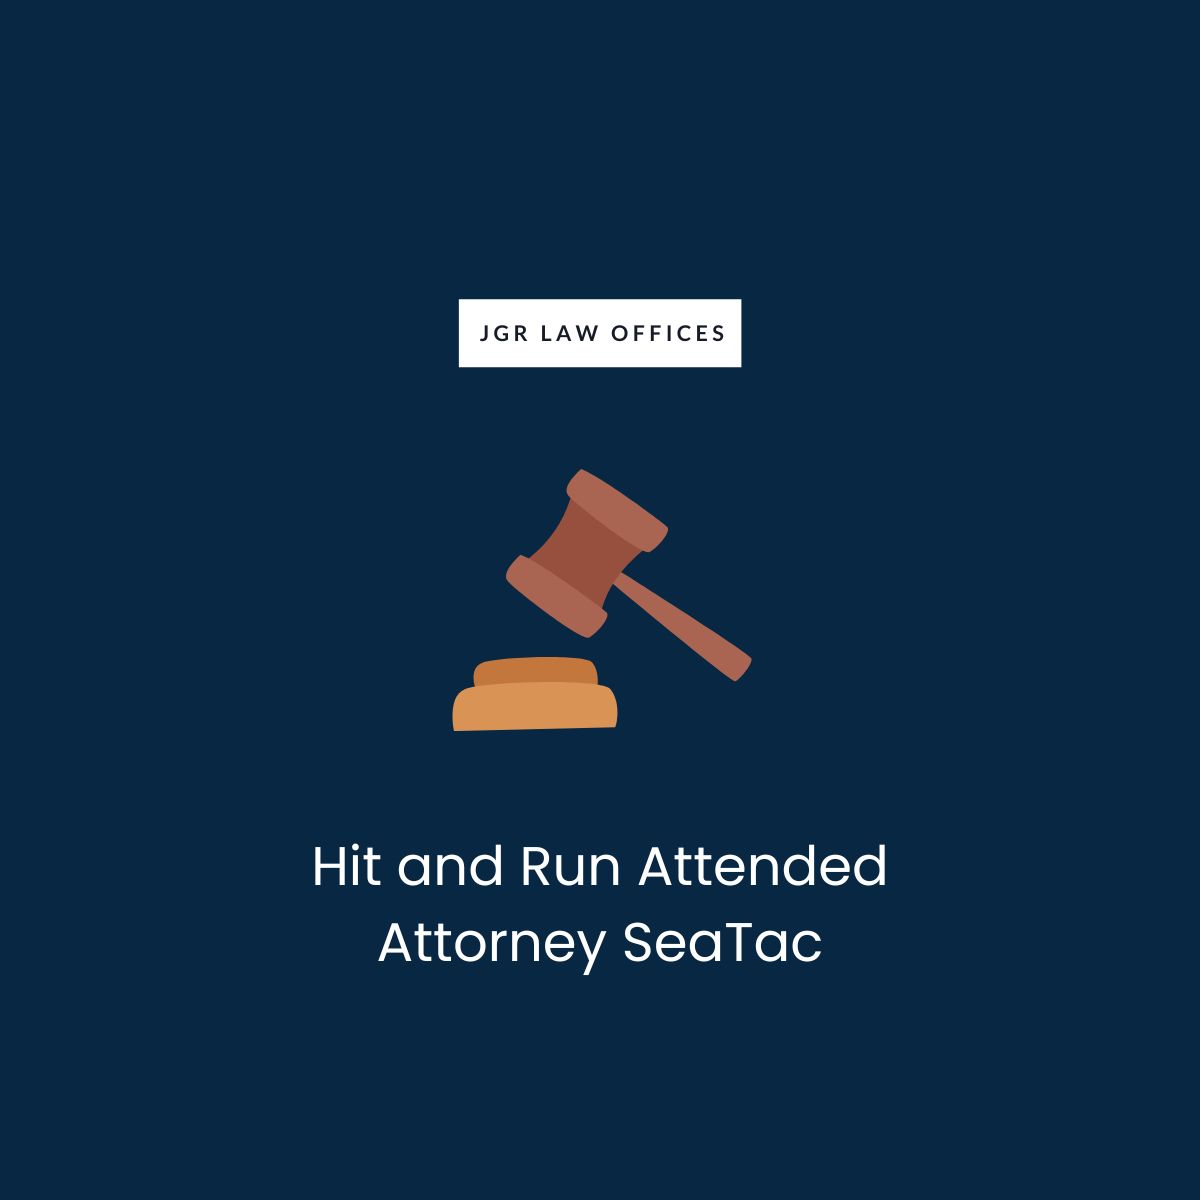 Hit and Run Attended Attorney SeaTac